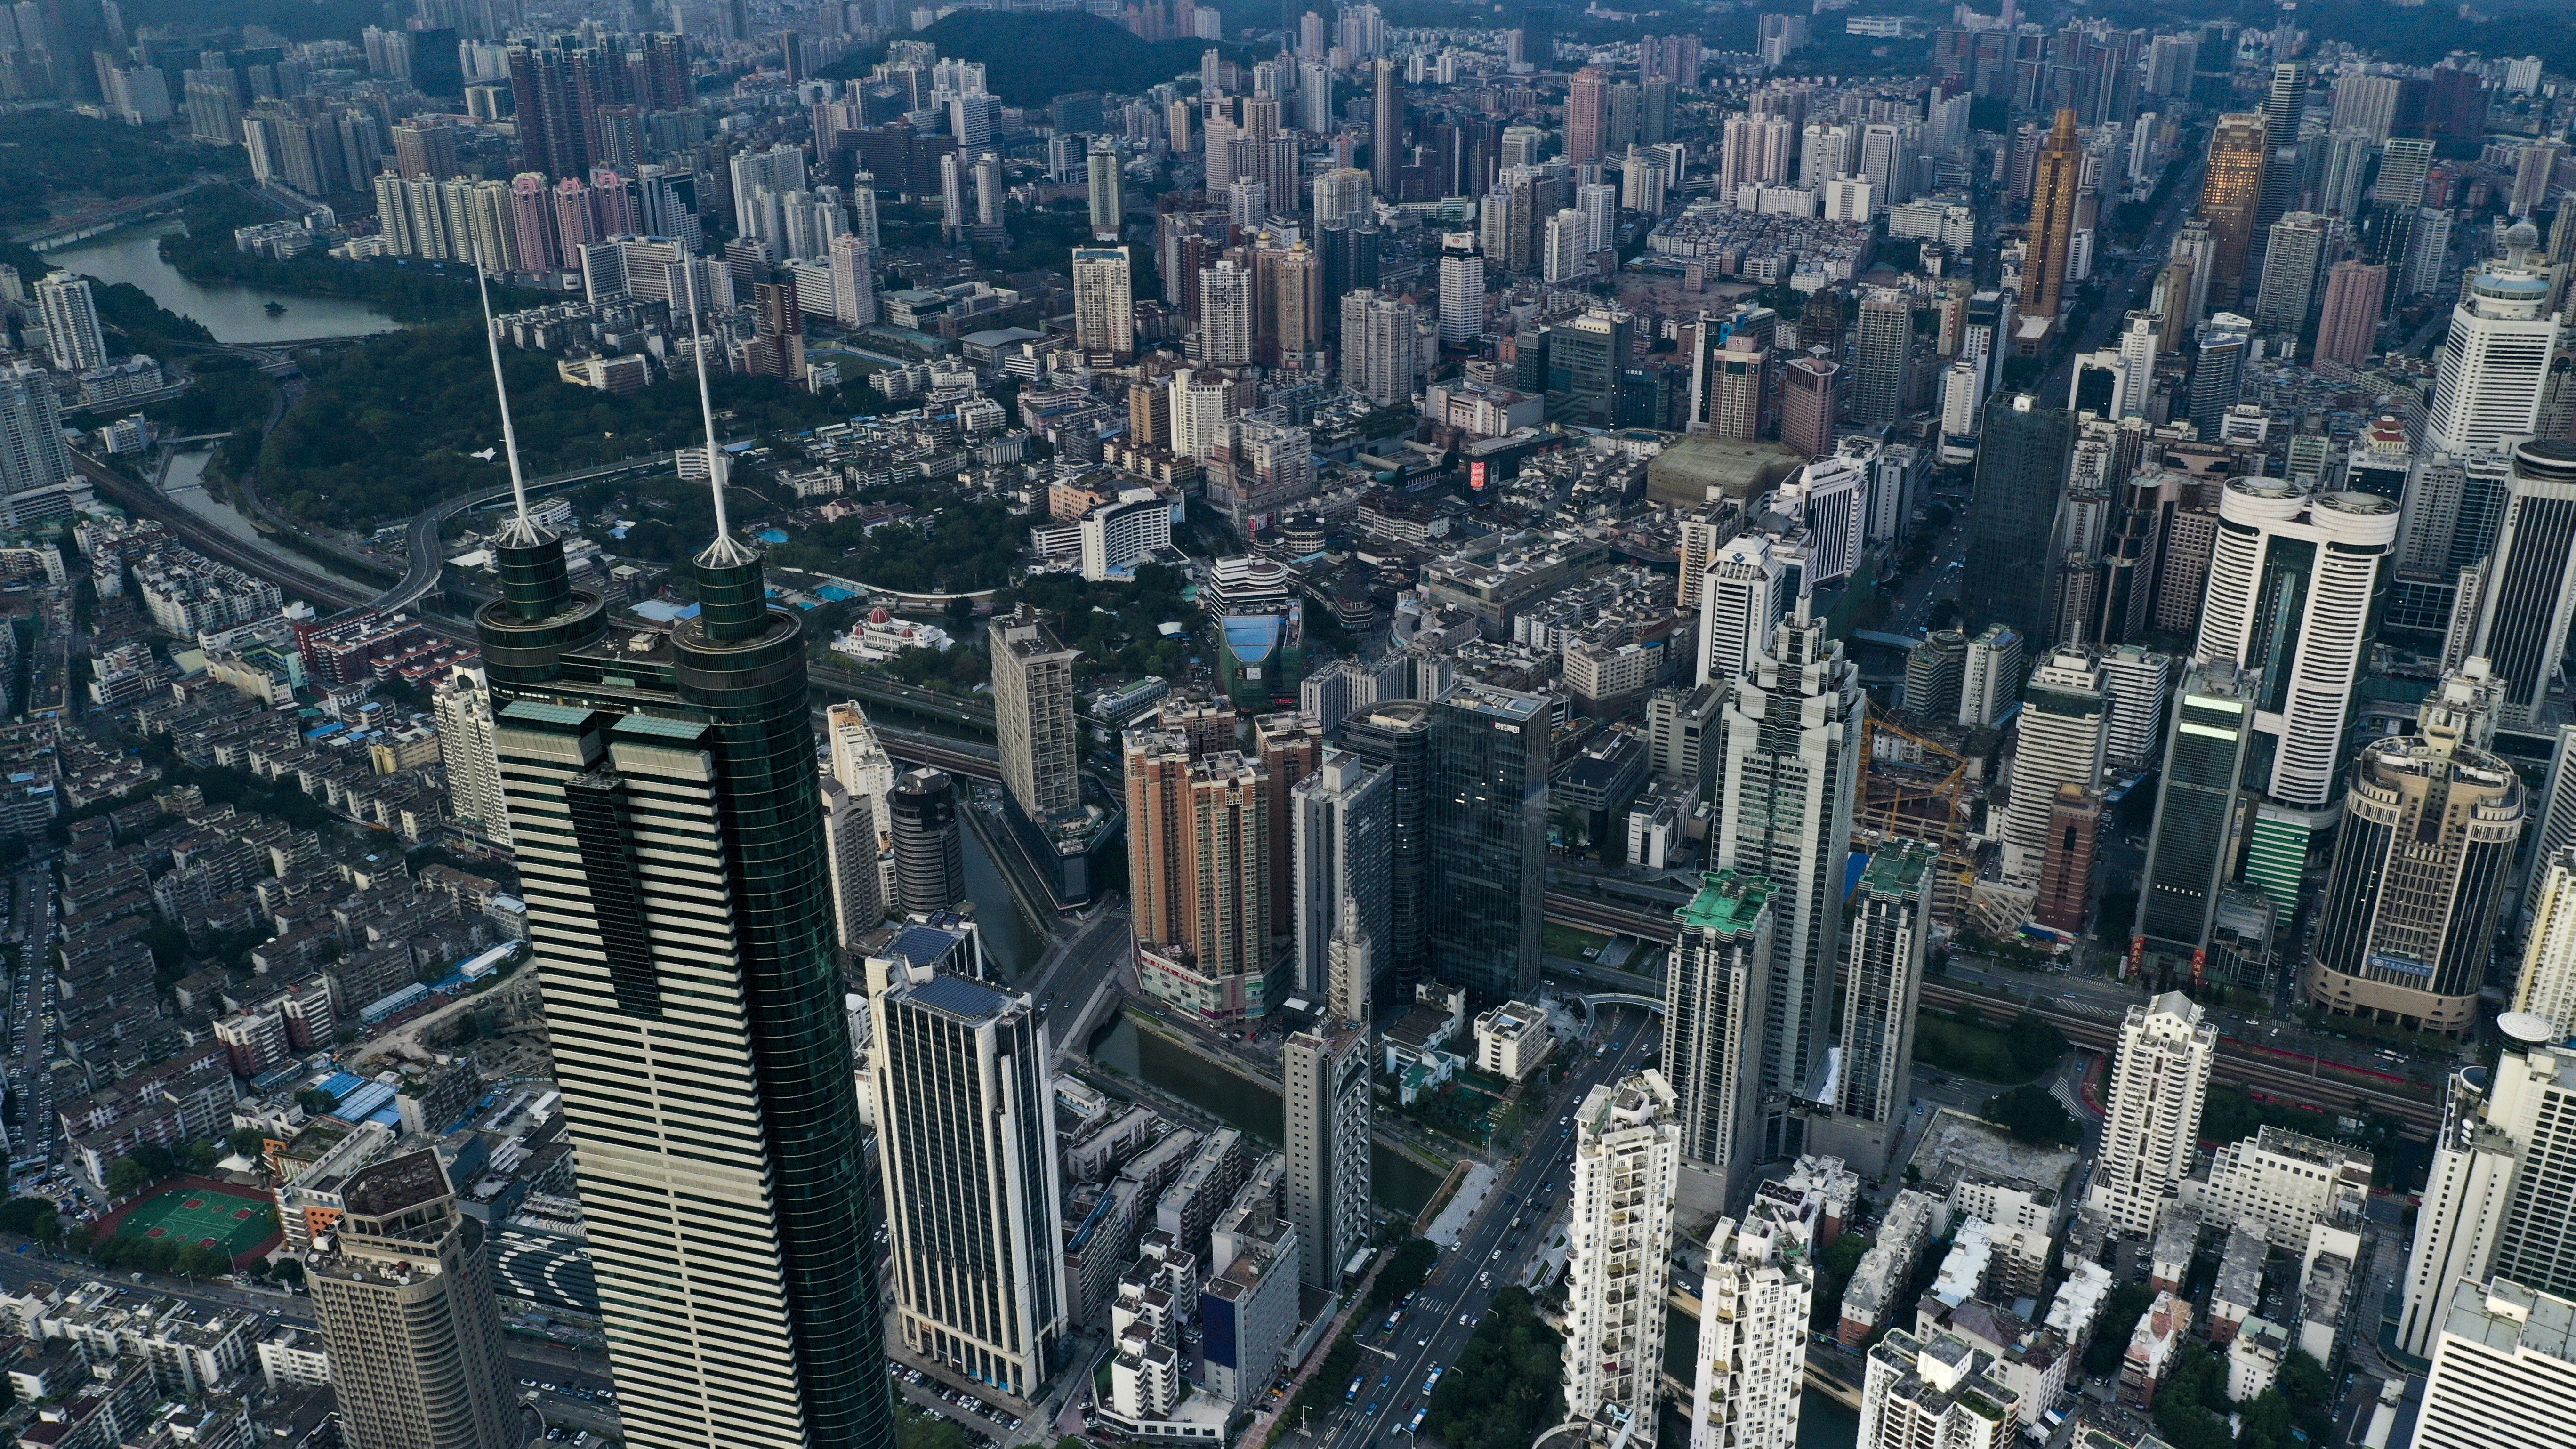 Investors have focused mainly on the Guangzhou and Shenzhen markets, above, during the epidemic. Photo: Martin Chan